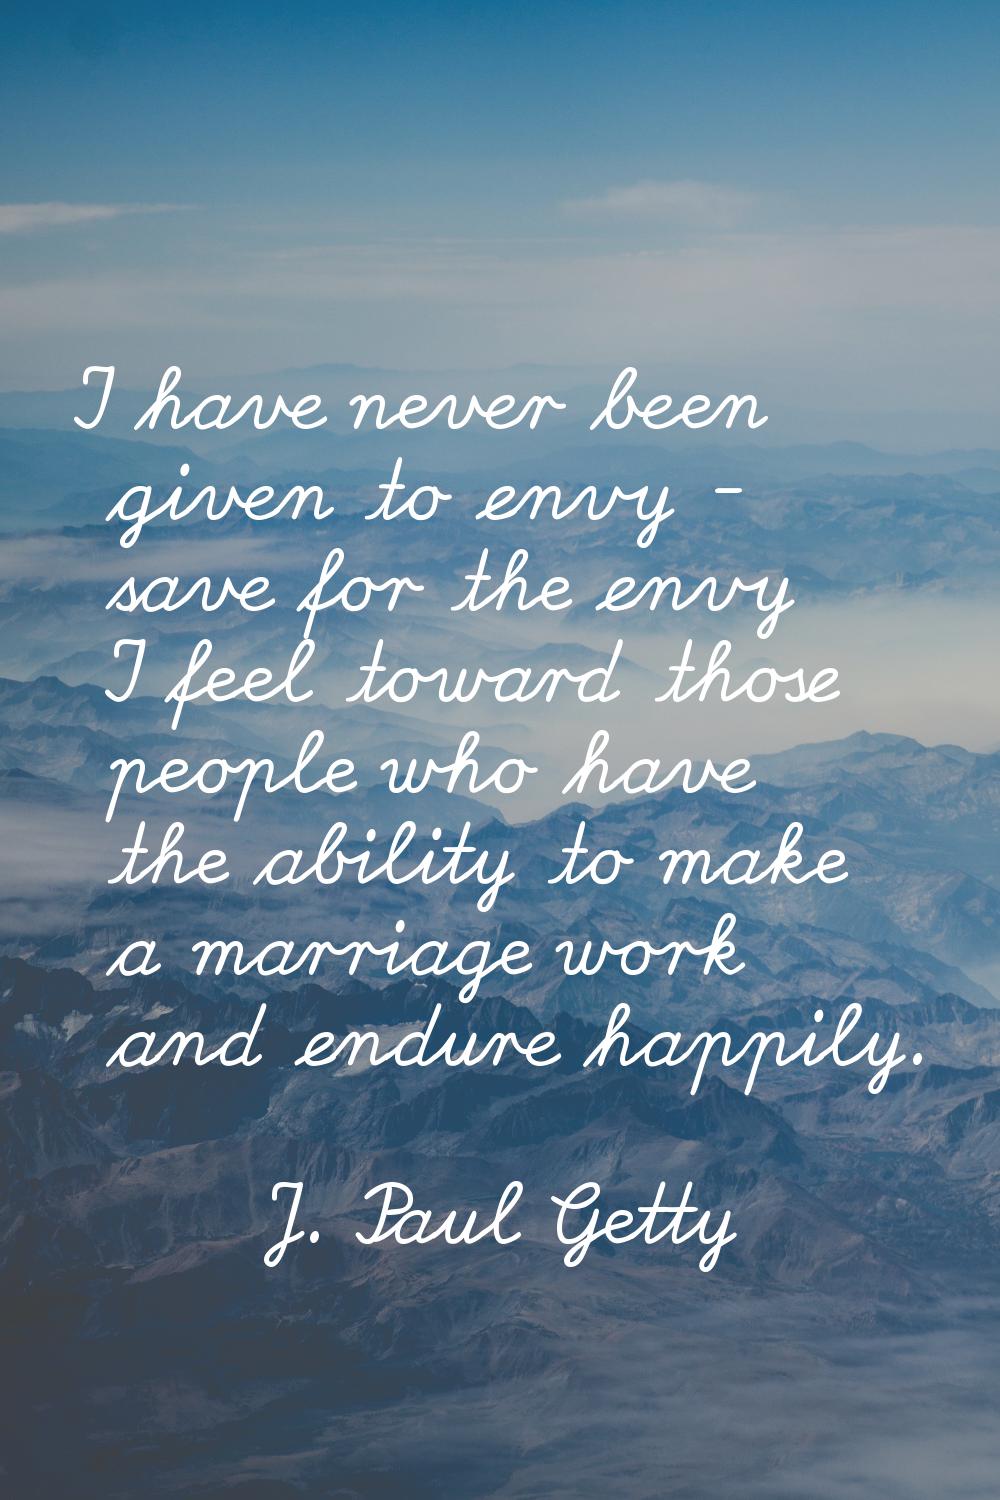 I have never been given to envy - save for the envy I feel toward those people who have the ability